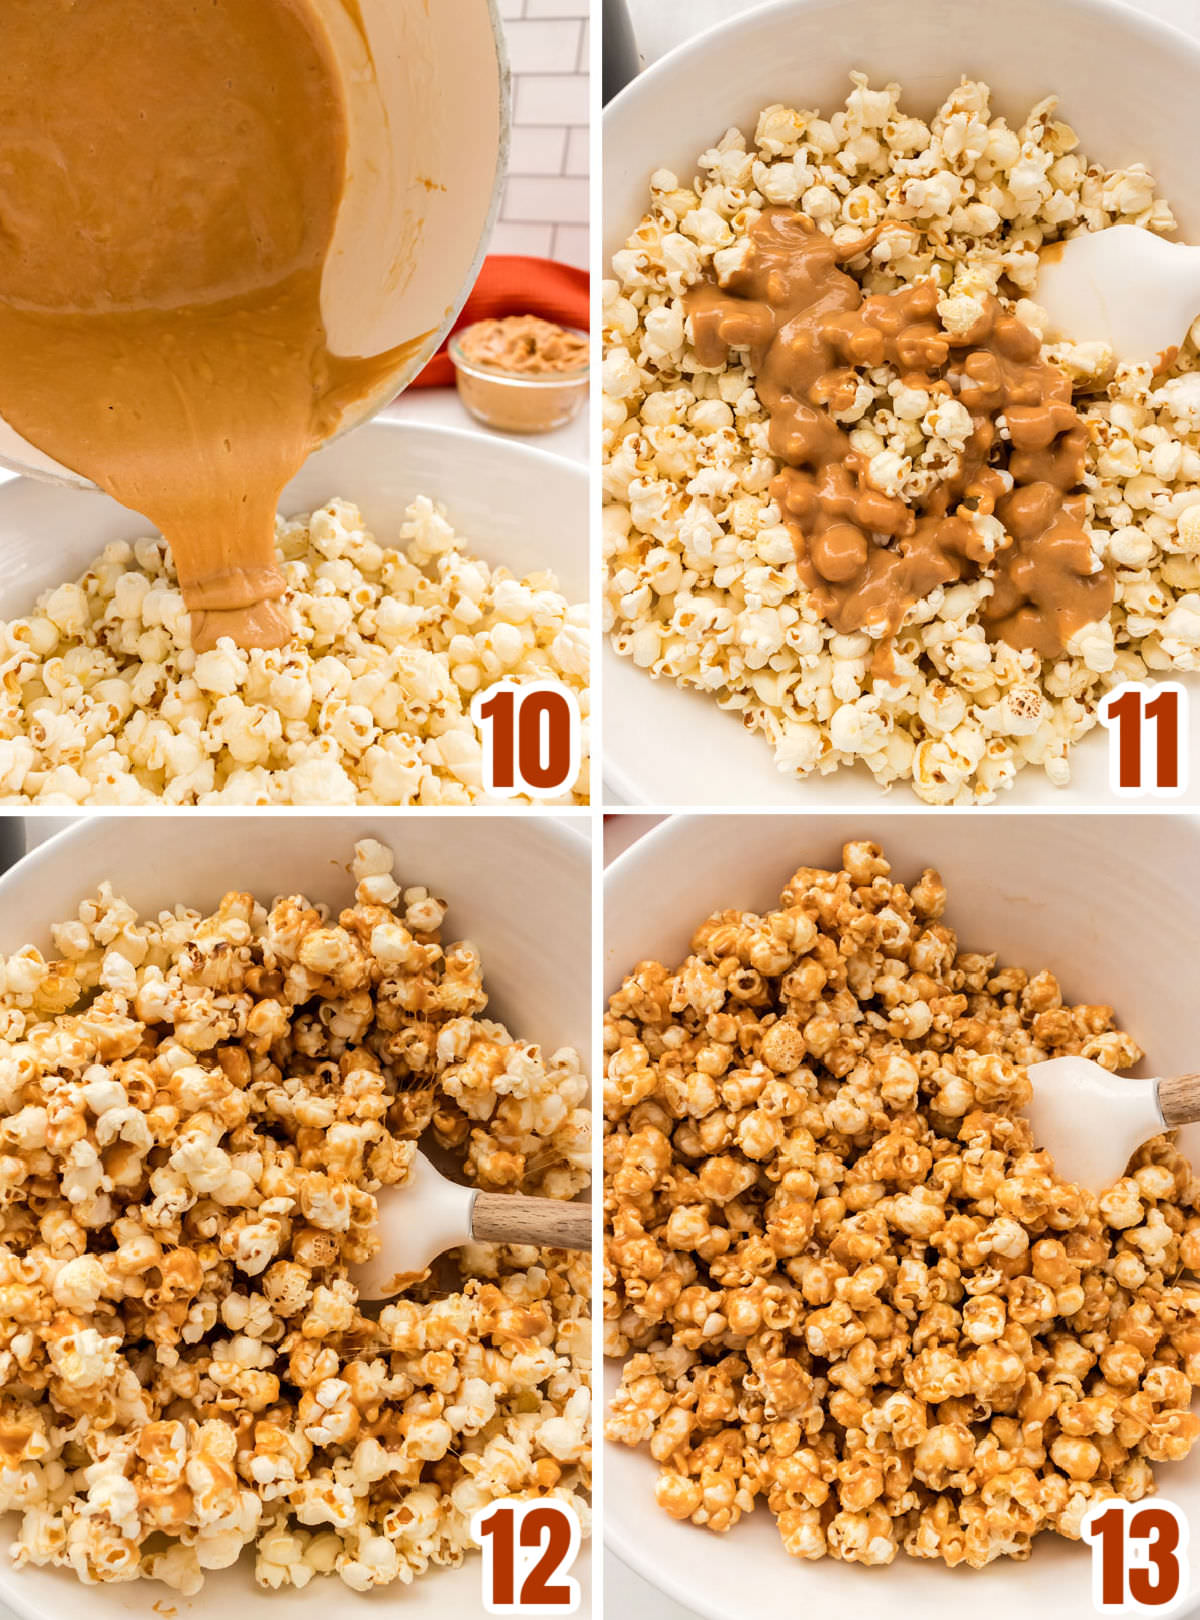 Collage image showing how to cover the popcorn with the peanut butter marshmallow mixture.